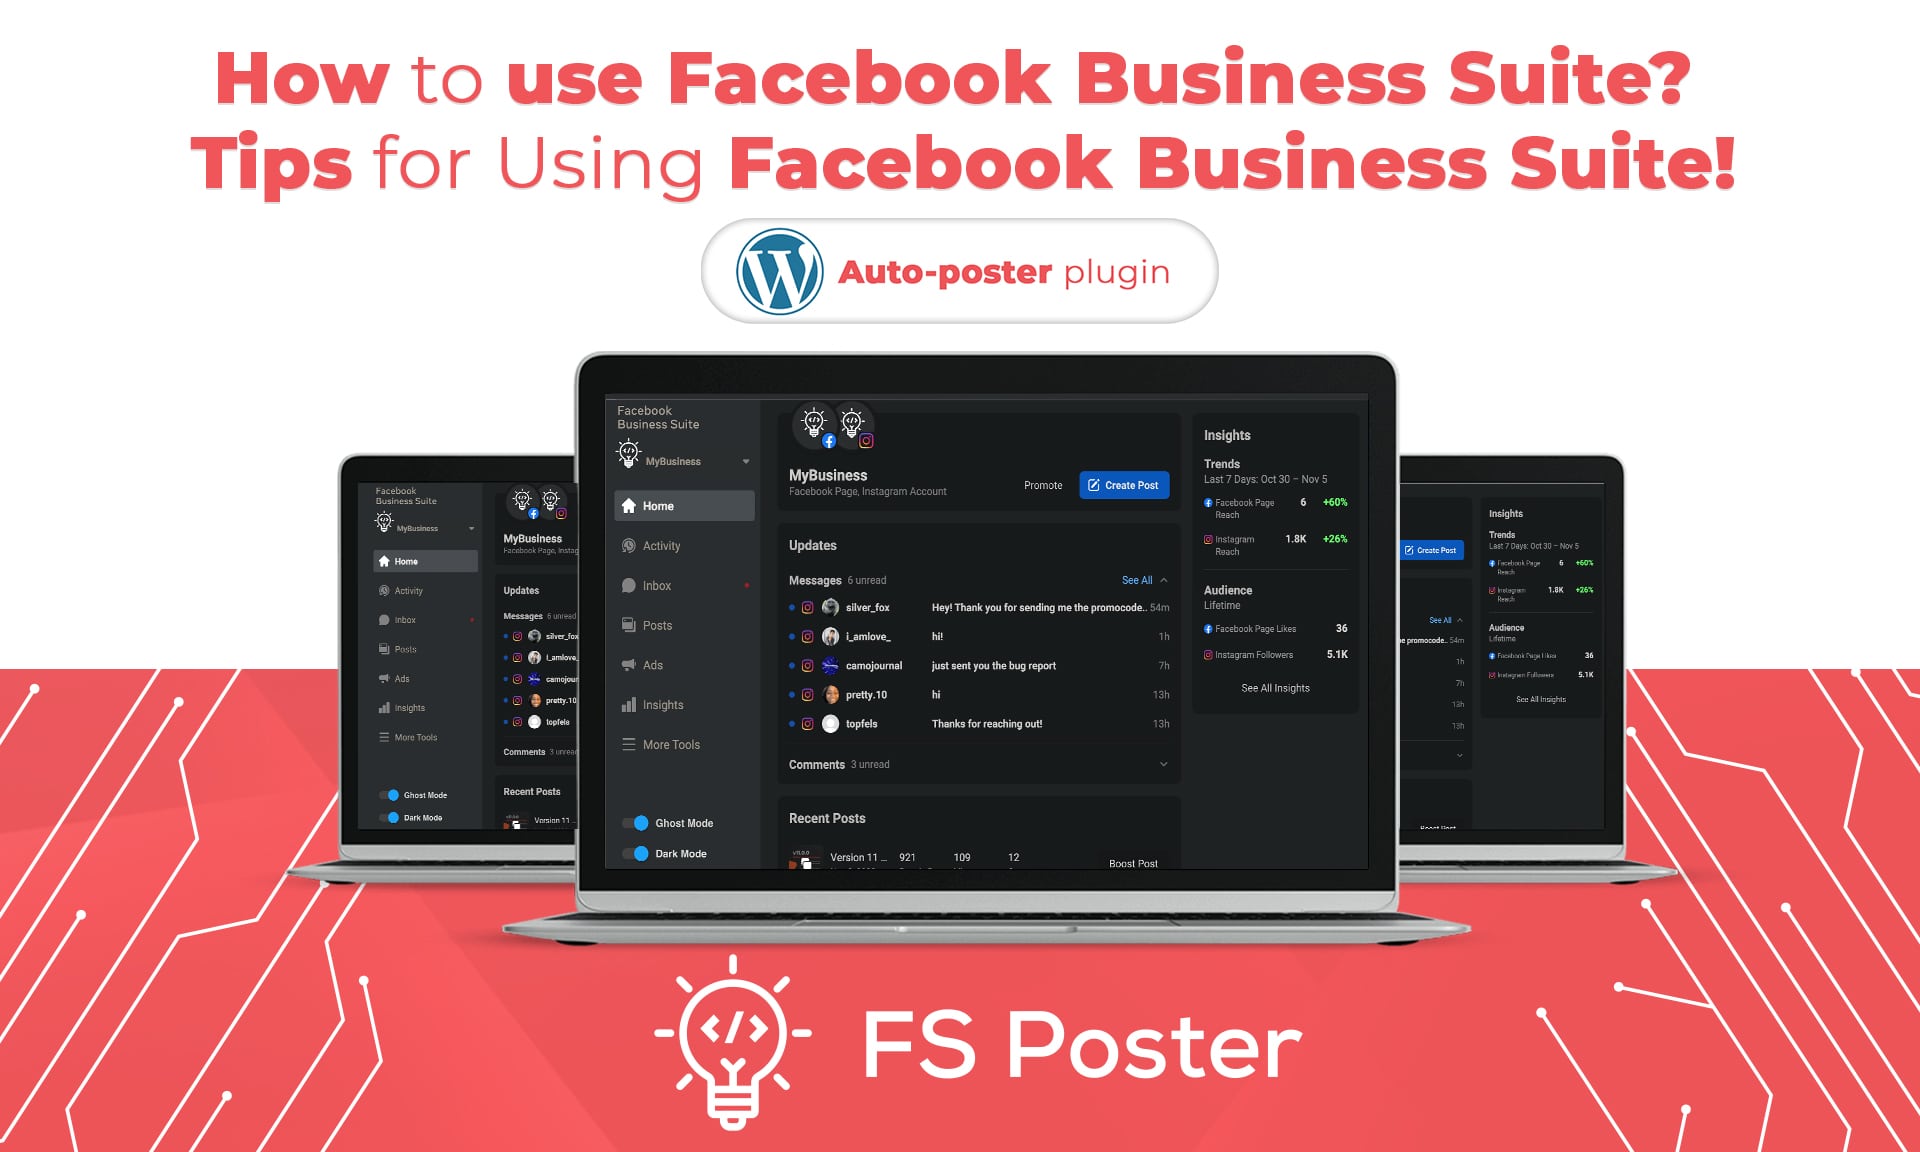 Everything You Need to Know About Facebook Business Suite